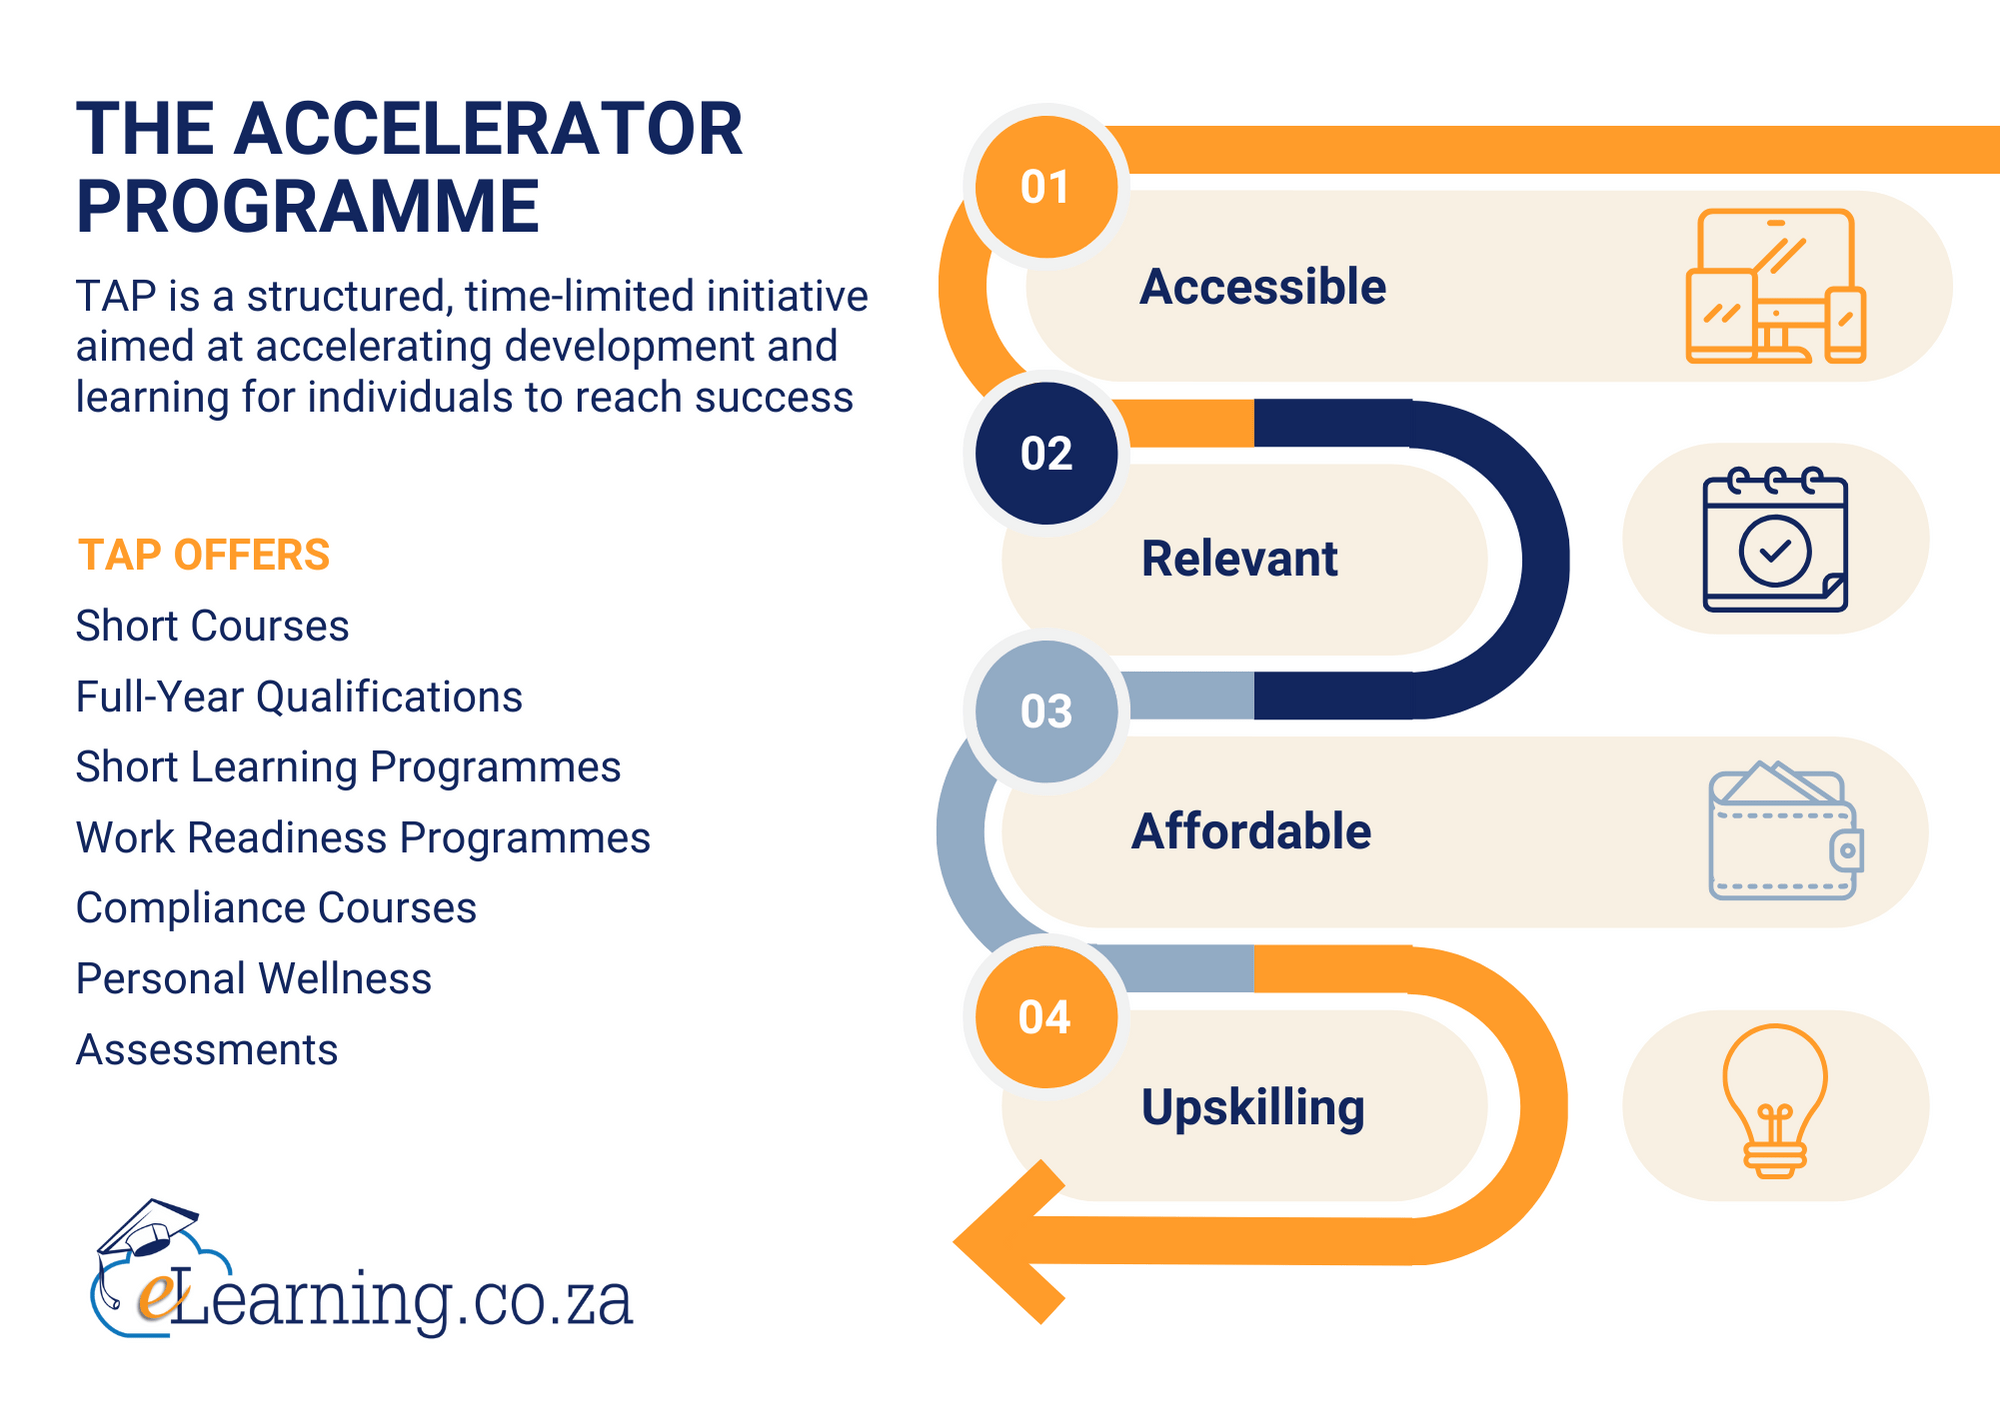 THE ACCELERATOR PROGRAMME